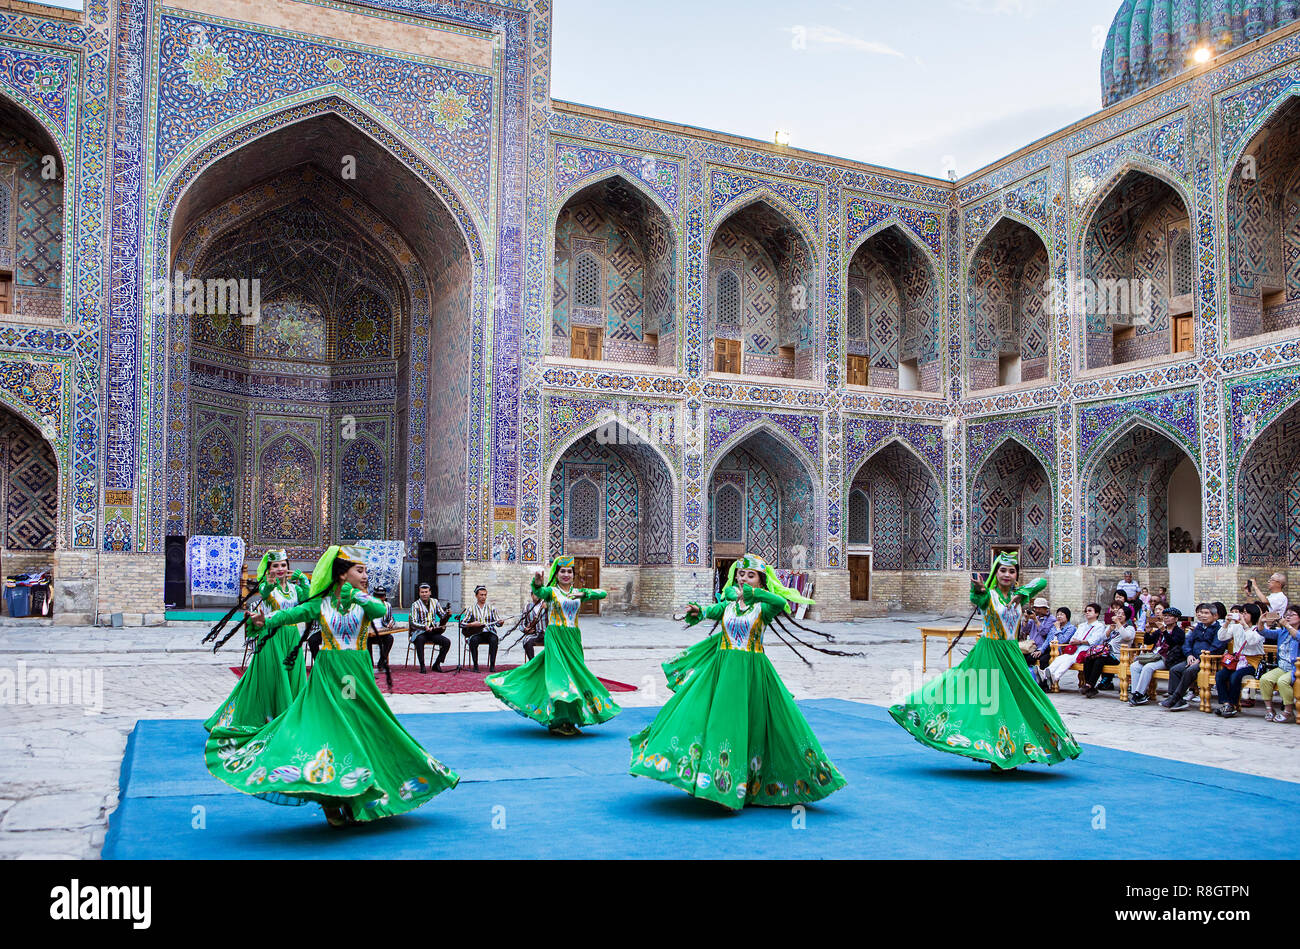 Traditional dance, folklore, spectacle, entertainment, performance, folklore, in the courtyard of Sher Dor Medressa, madrasa, Registan, Samarkand, Uzb Stock Photo